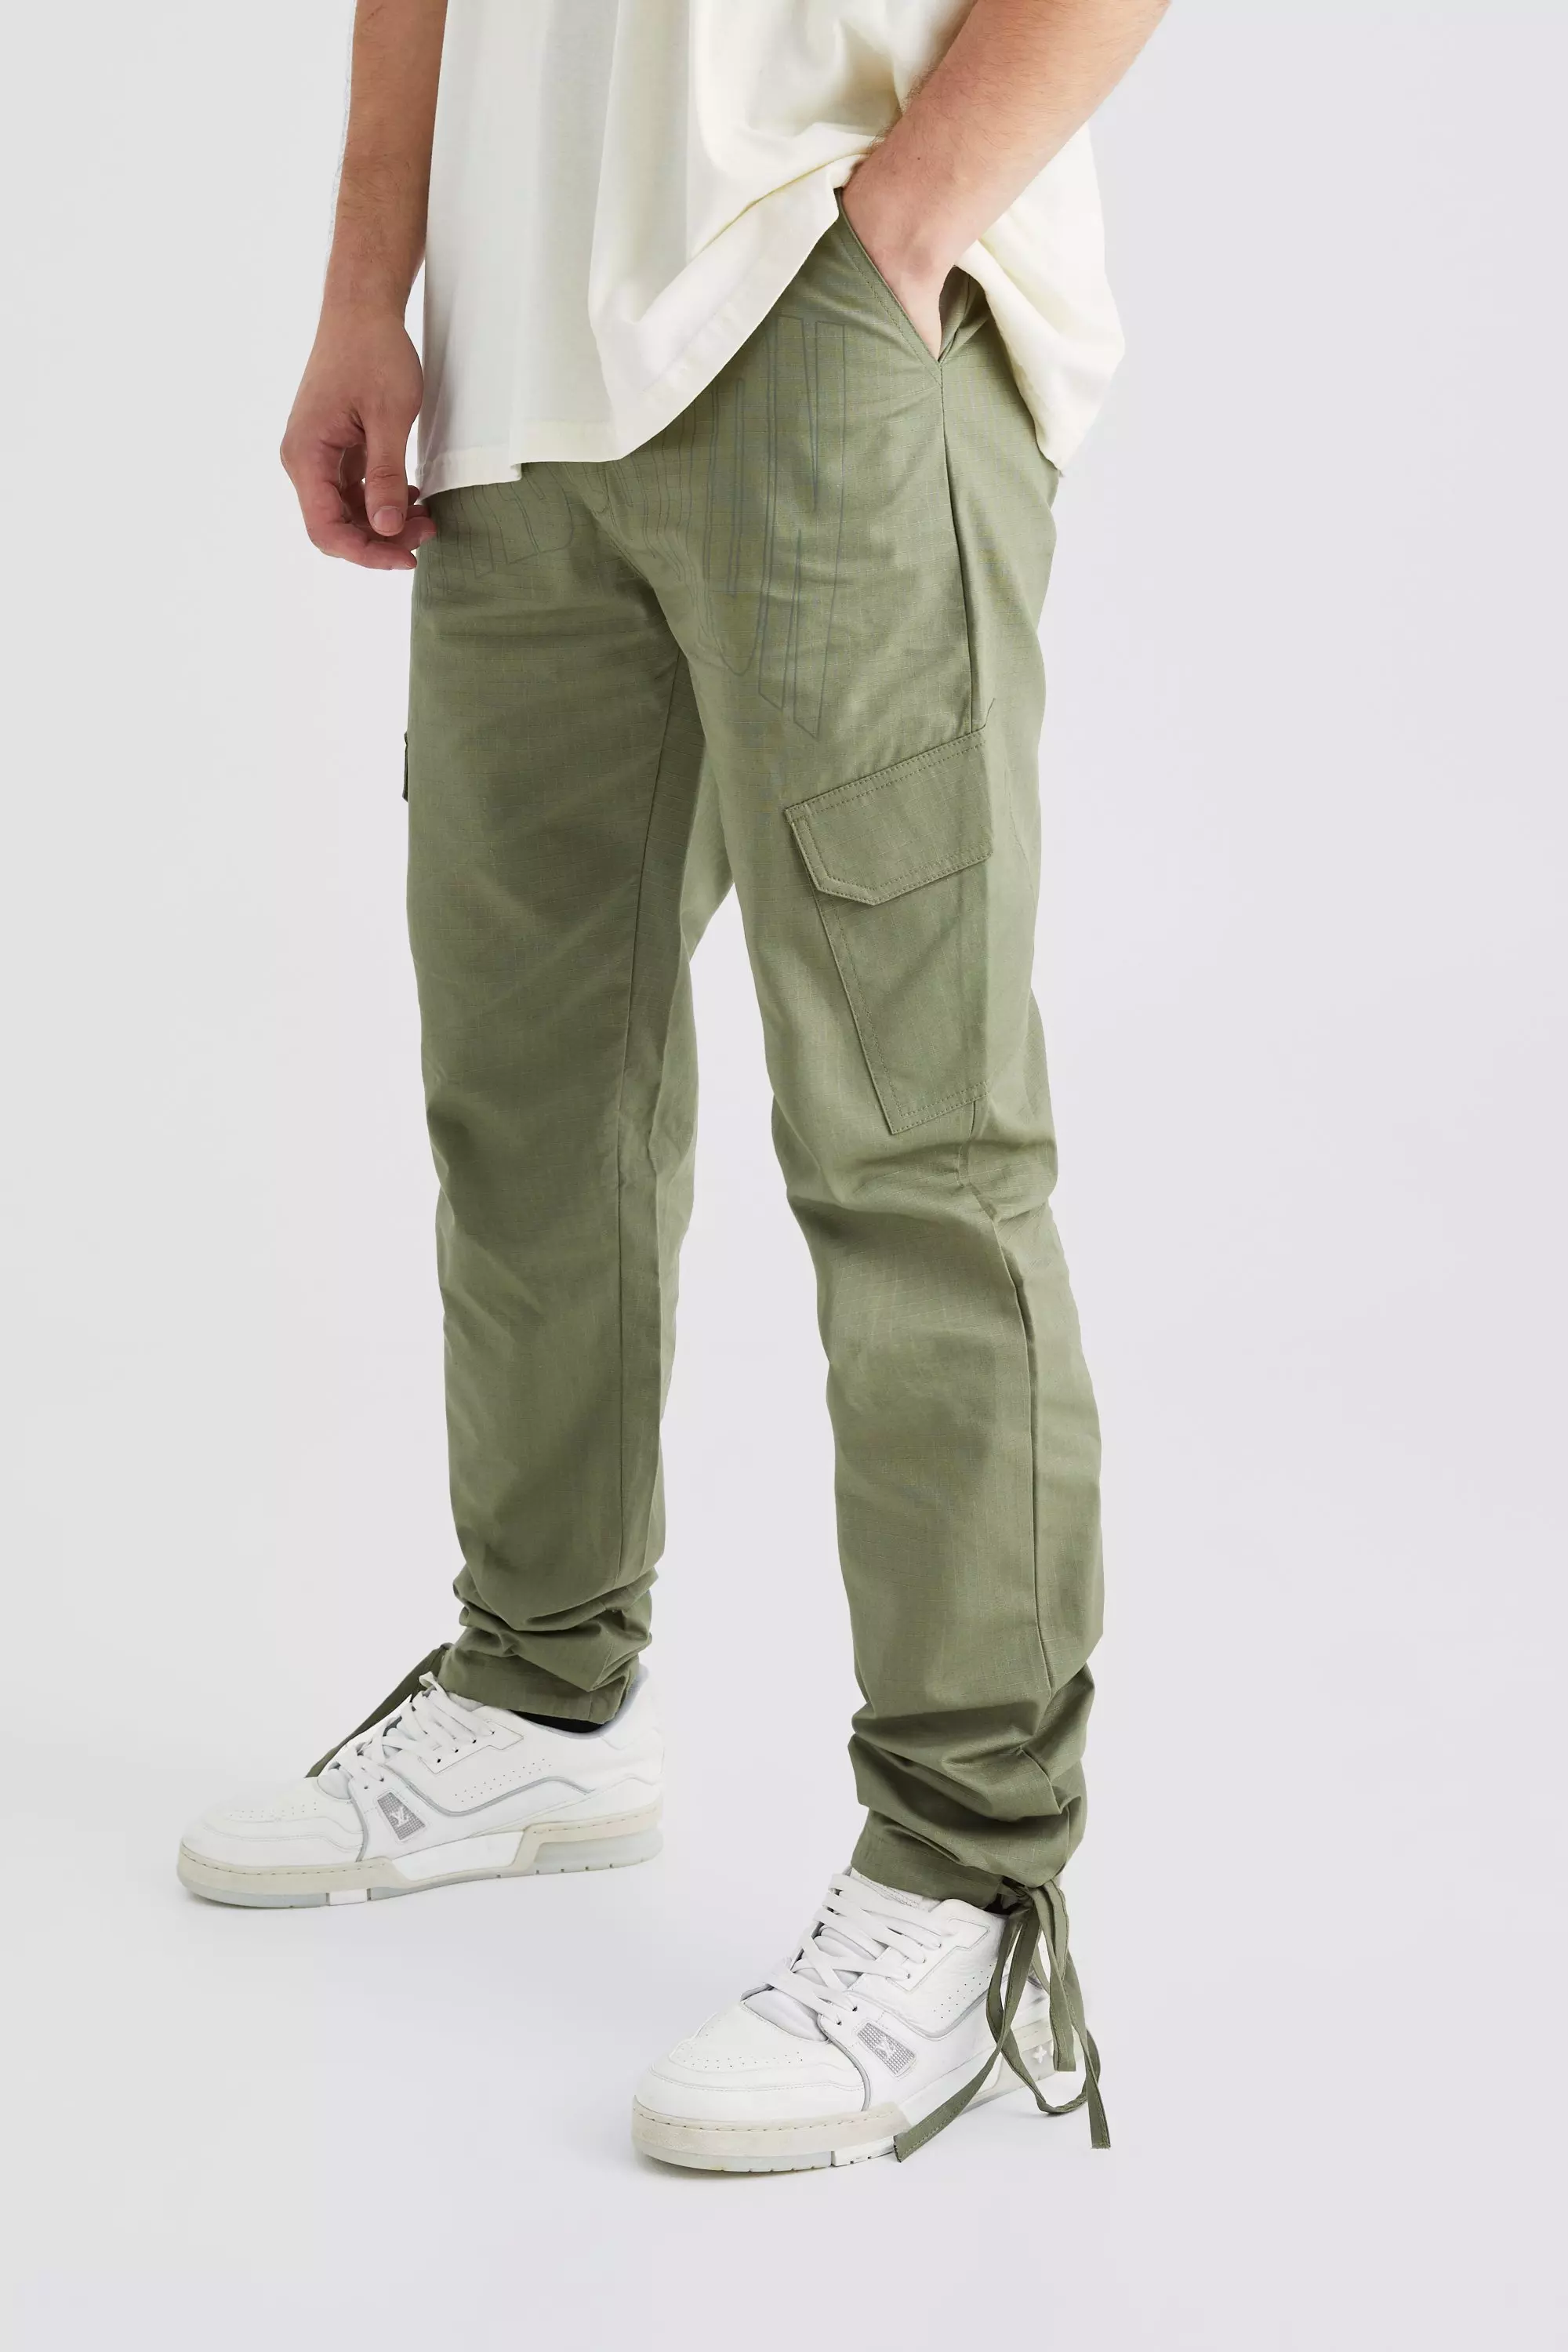 Ripstop Pants for Tall Men